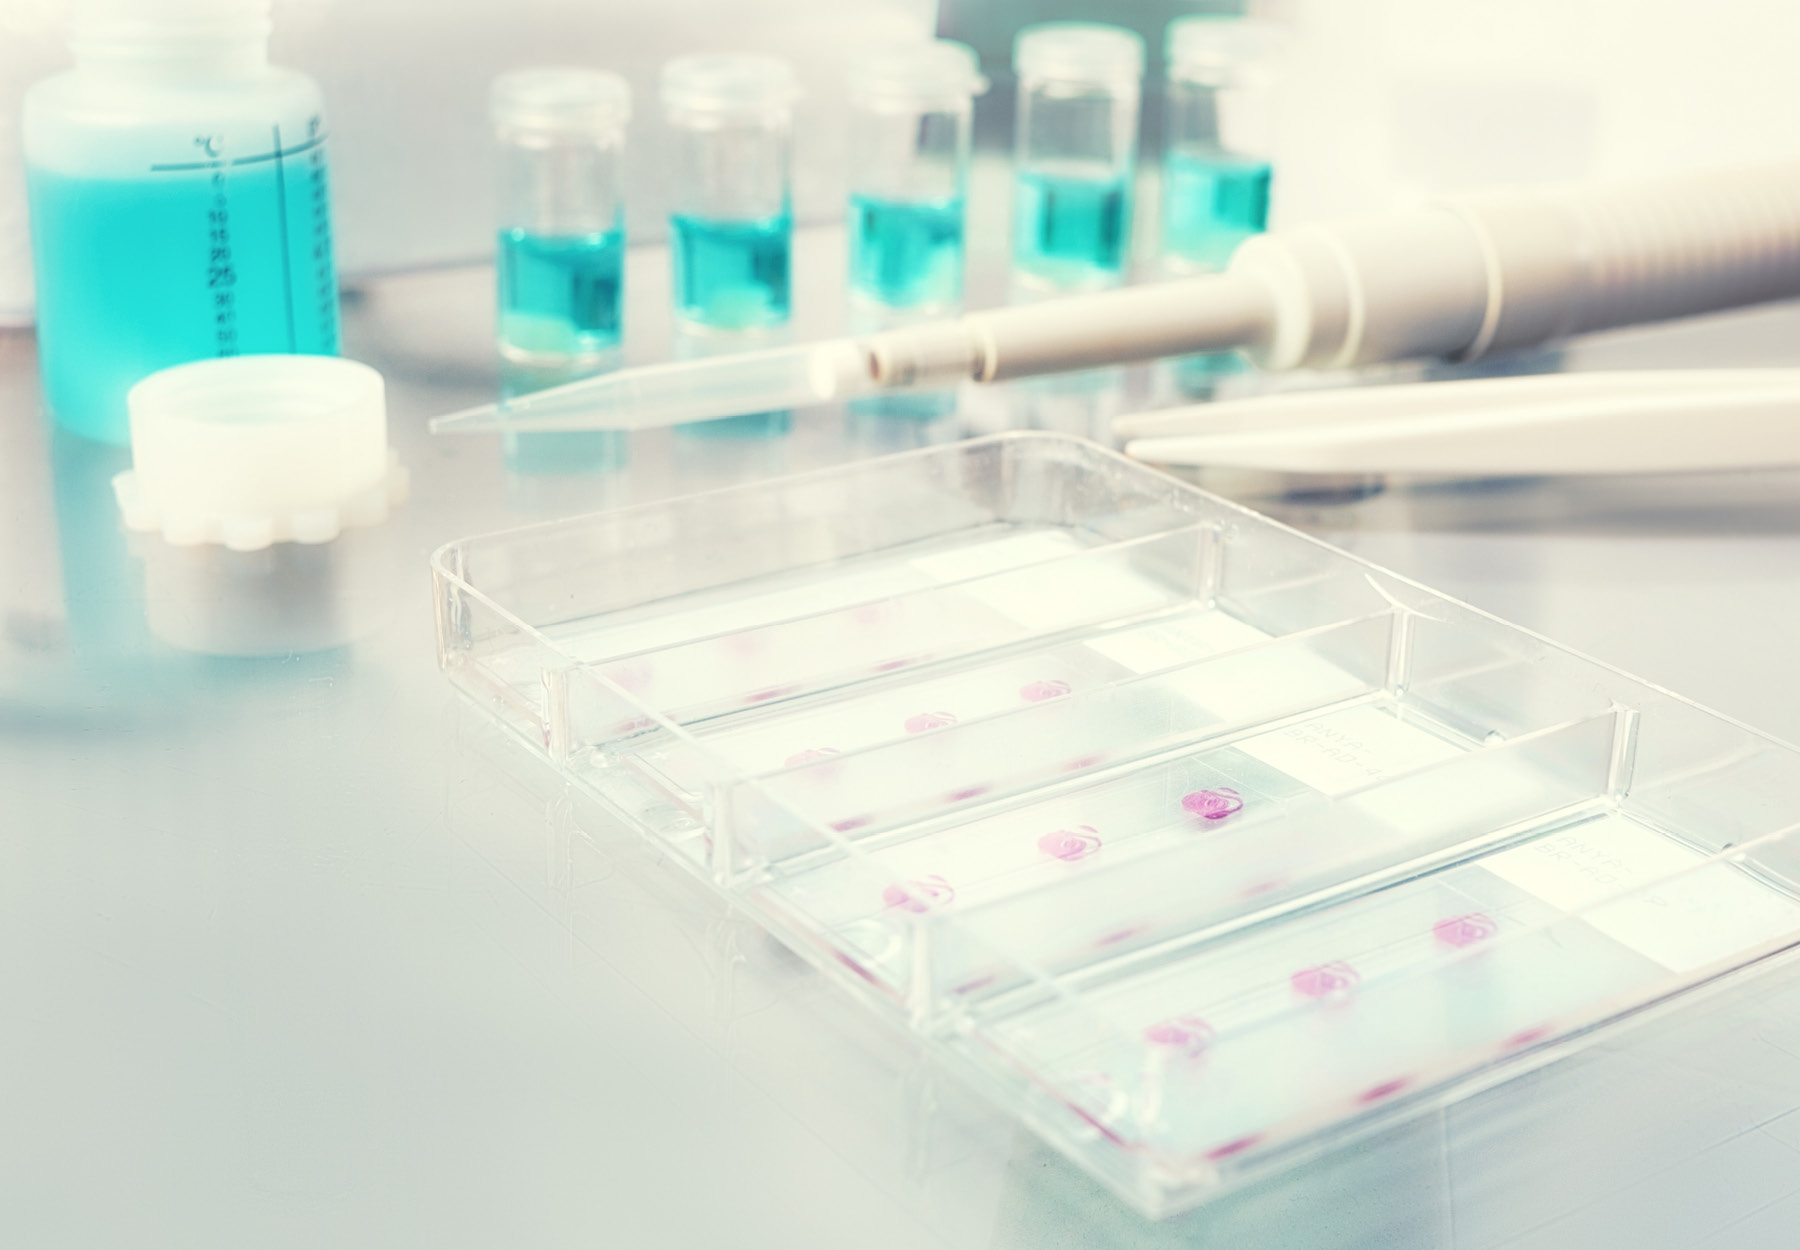 Closeup image of pathology slides with a pipette and tubes of teal-colored liquid in the background. Stock image.